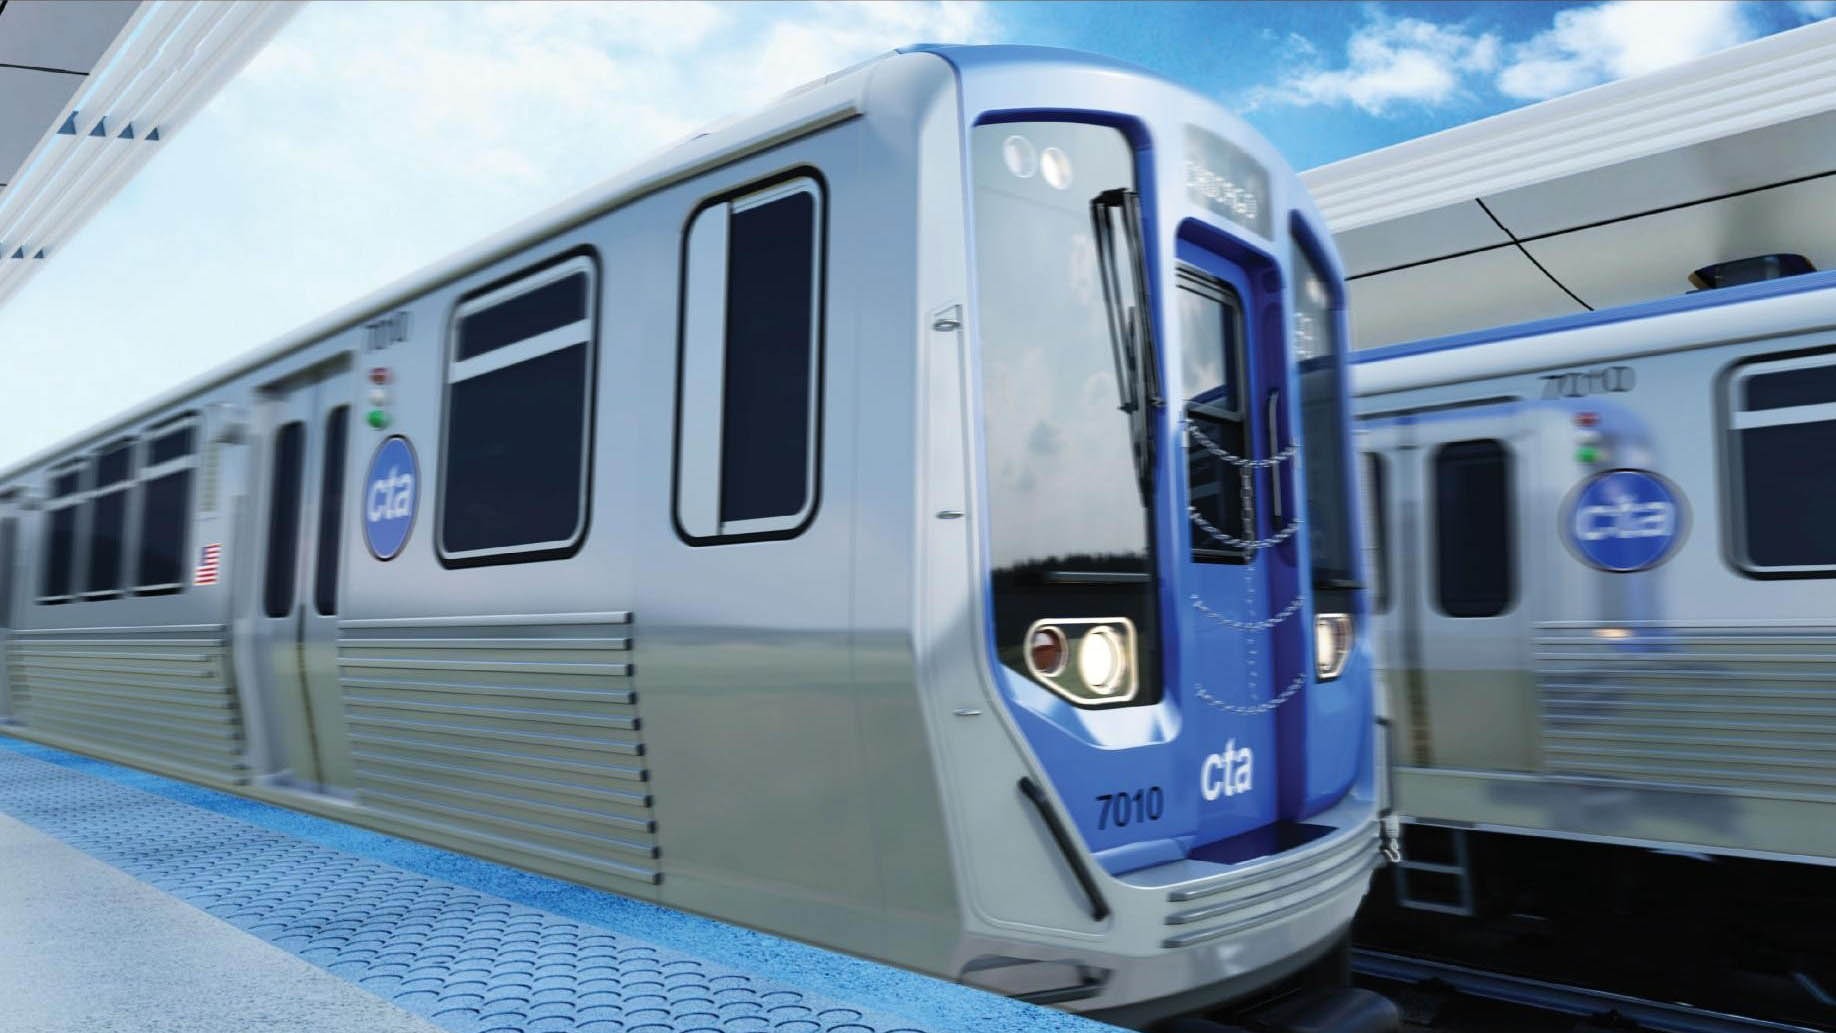 Cta Rail Car Trains Then And Now Cbs Chicago